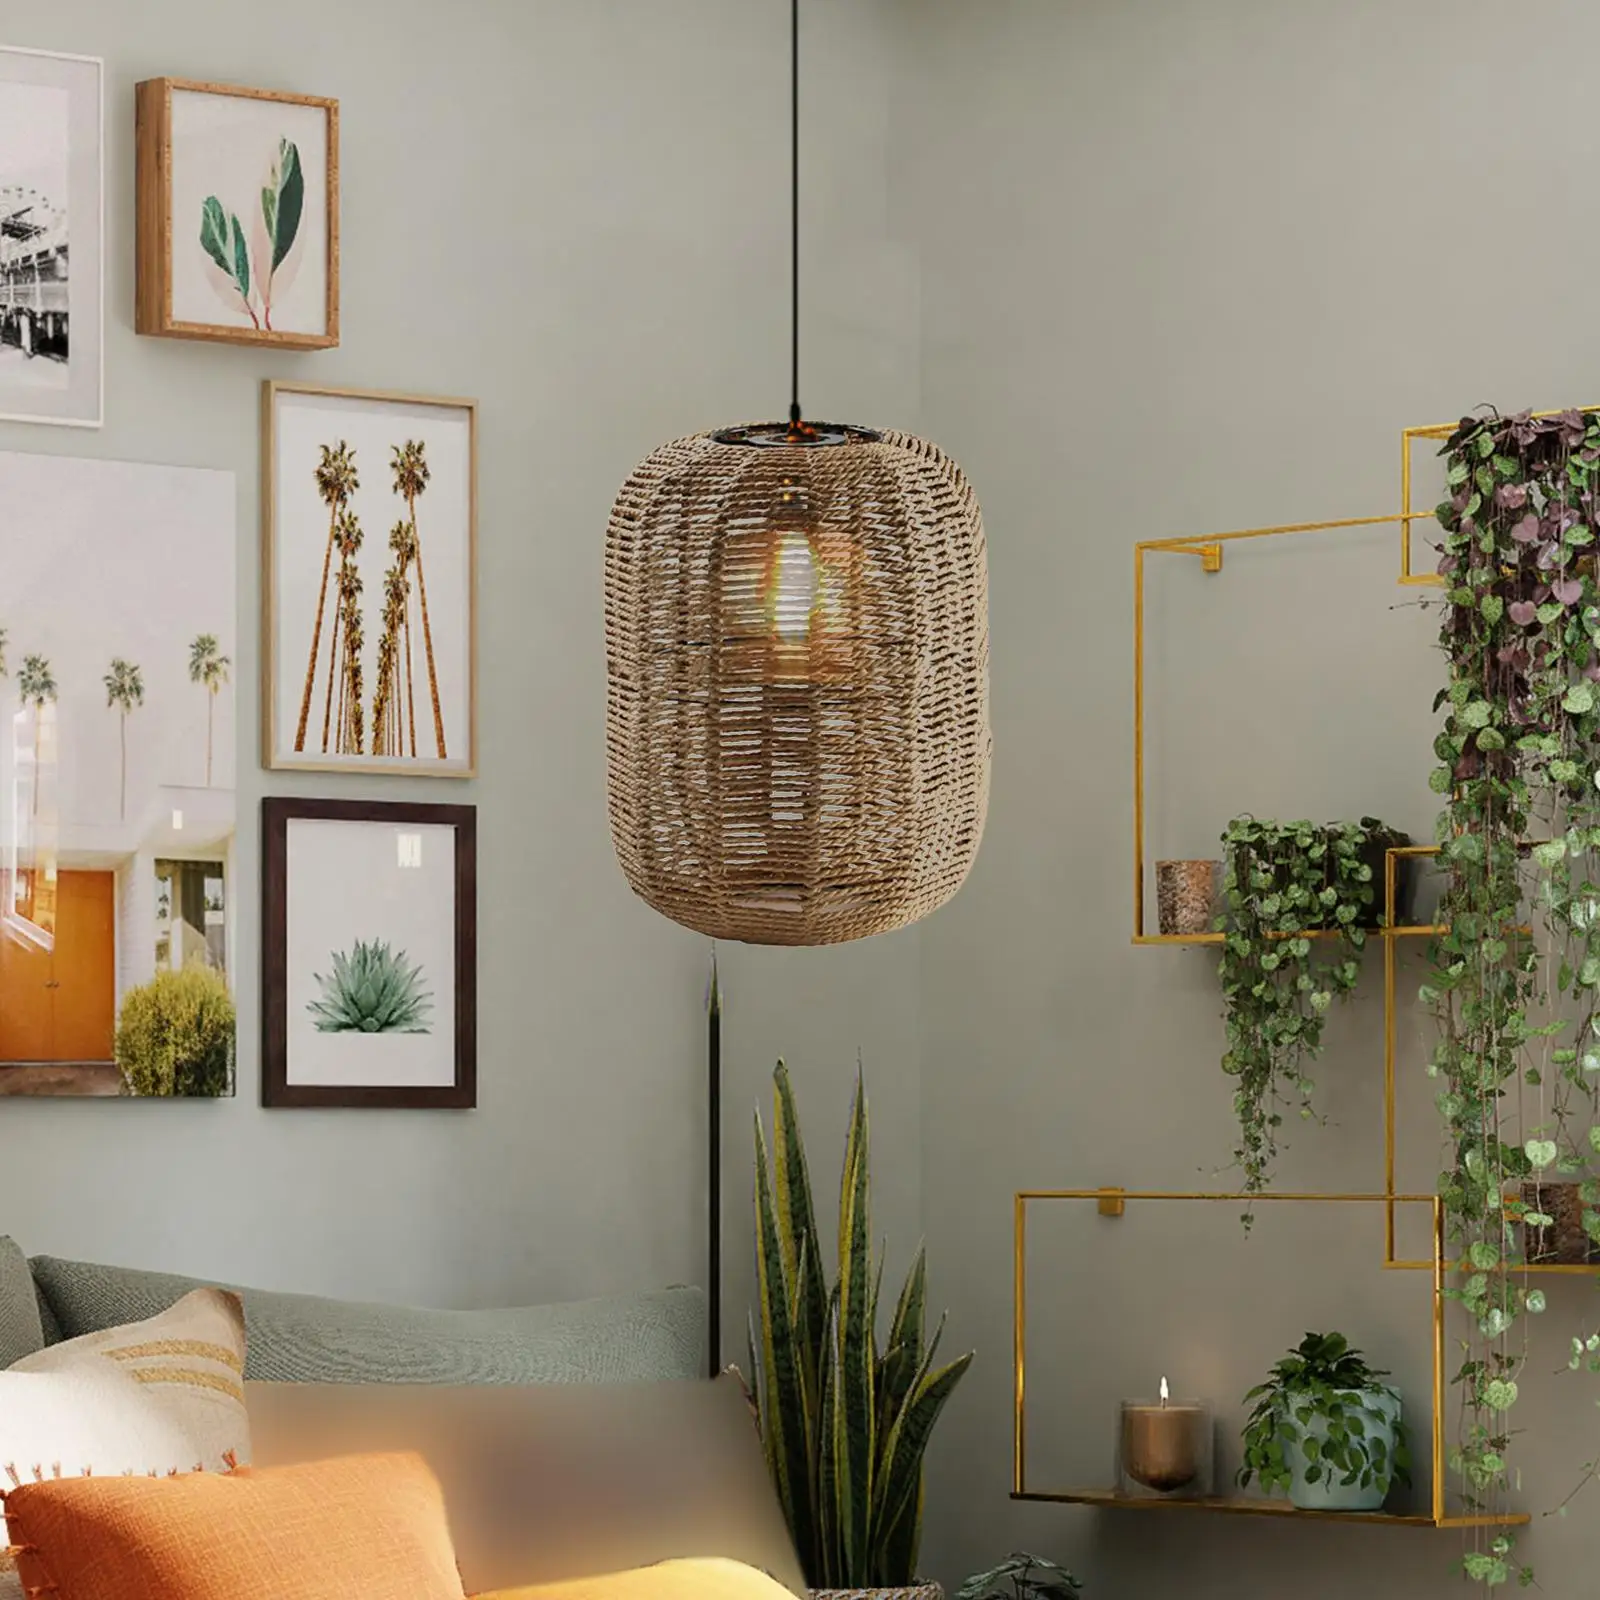 Retro Style Pendant Lamp Shade, Woven Ceiling Light Shade Hanging Light Rope Fixture Lampshade, for Room